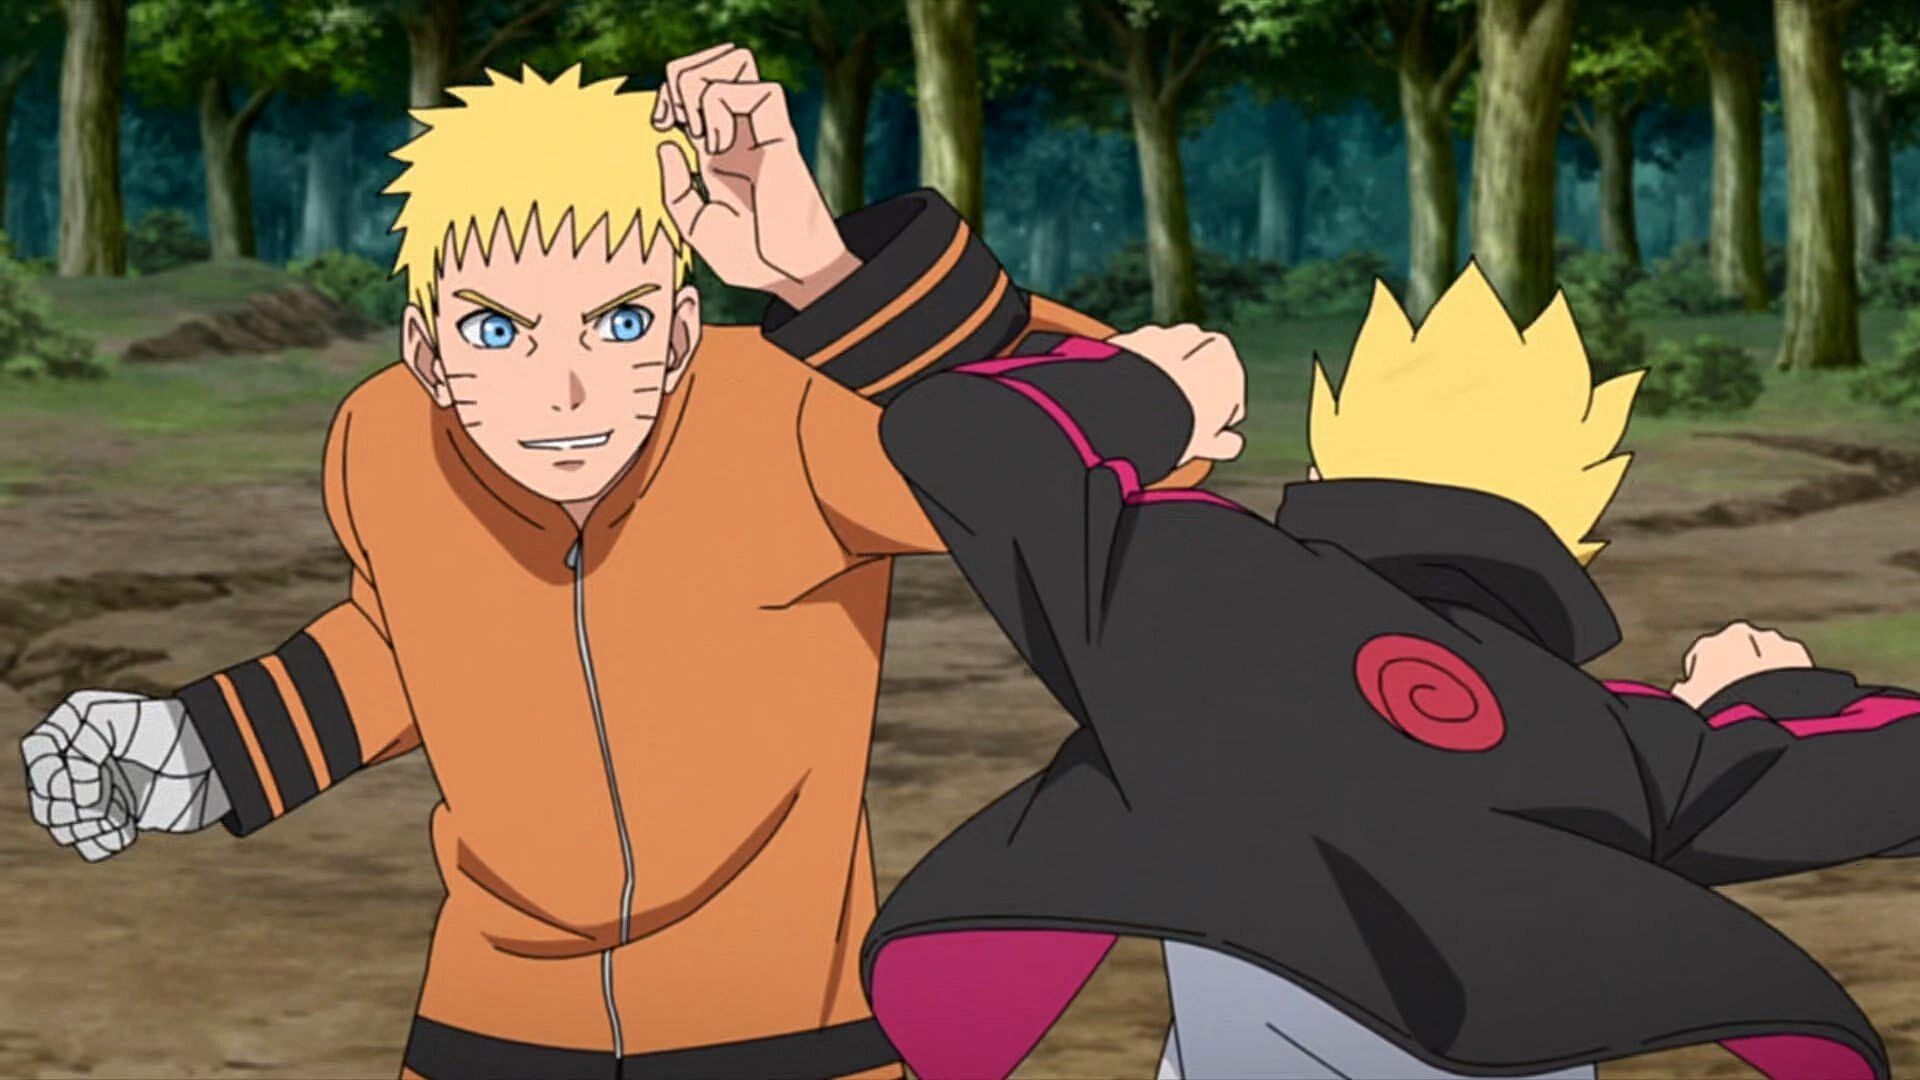 Why does the 7th Hokage look so much like Boruto's dad and Naruto